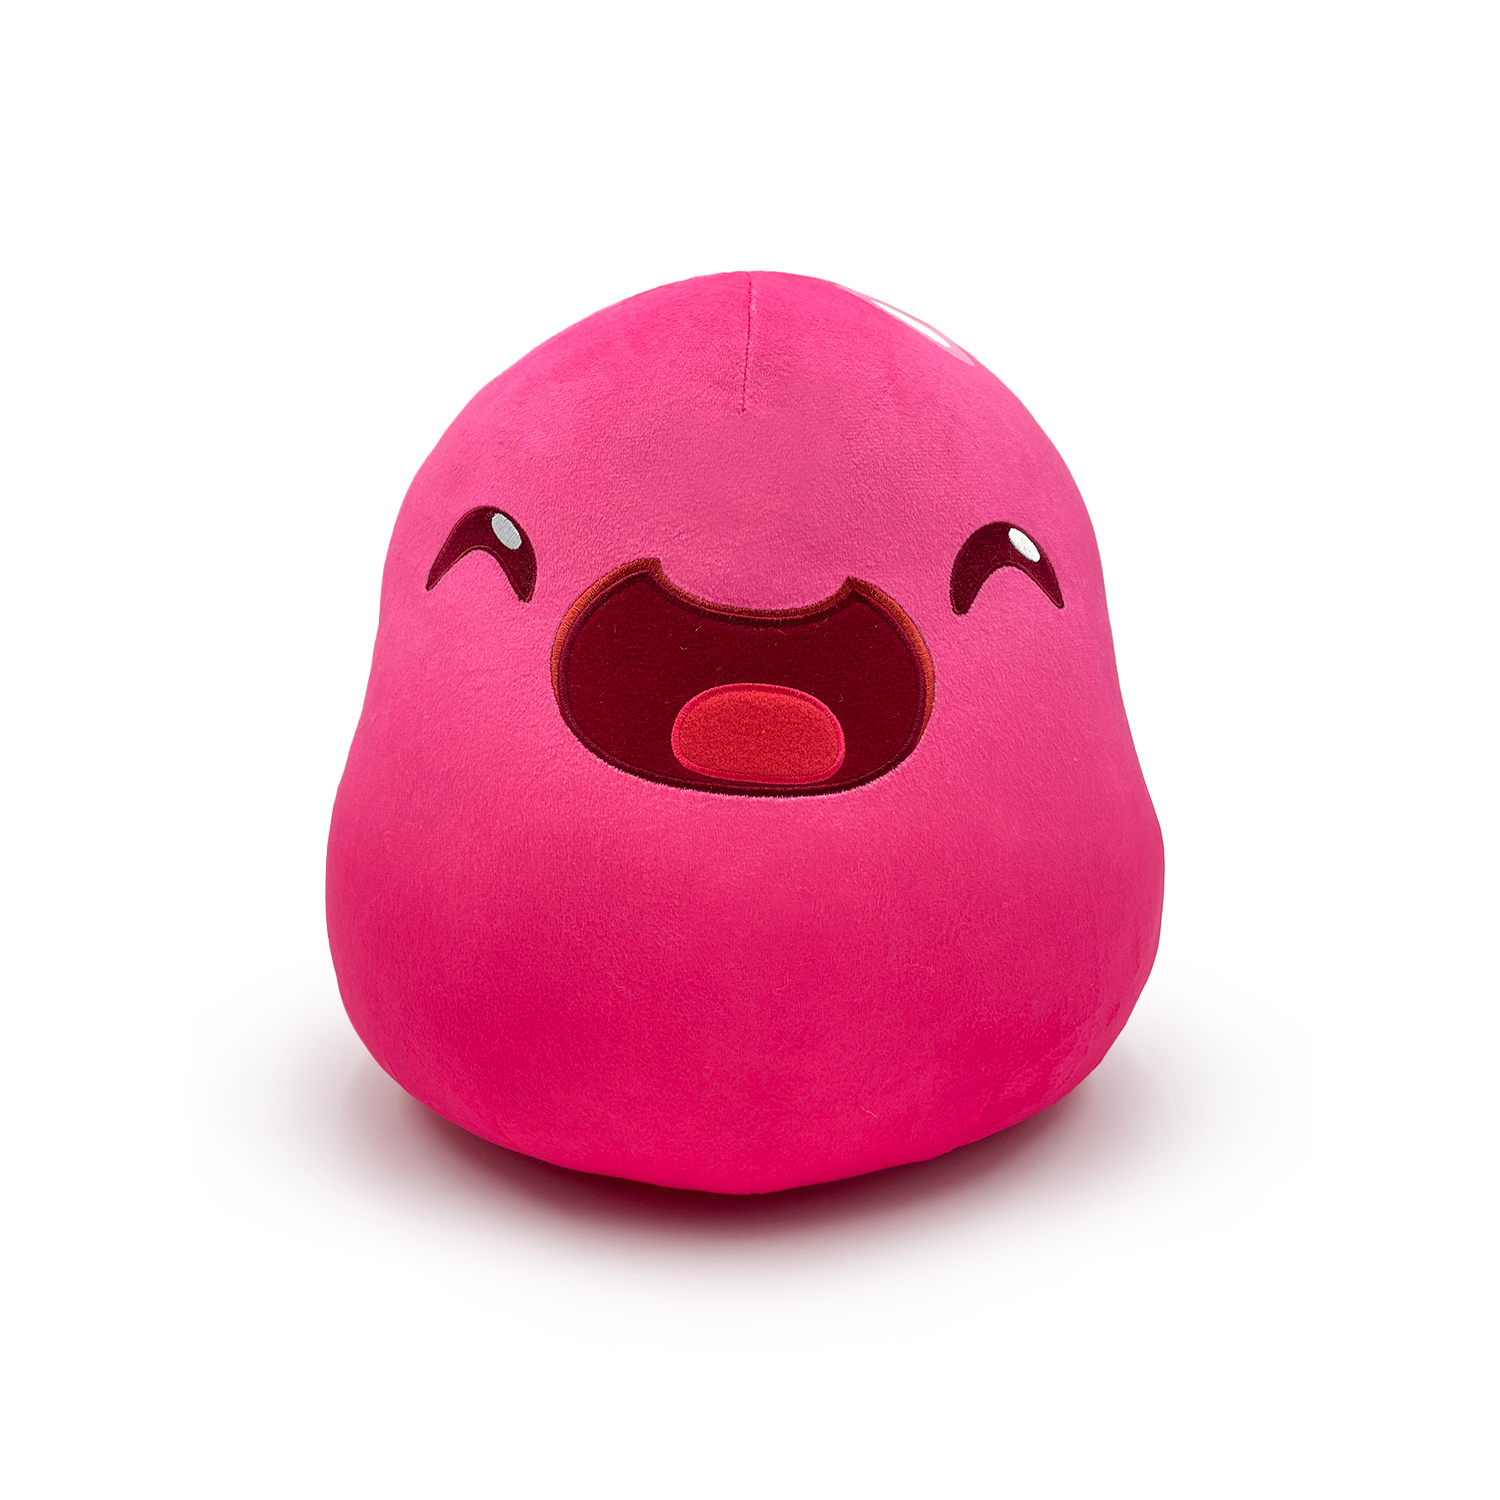 Slime Rancher Pin Set – Youtooz Collectibles